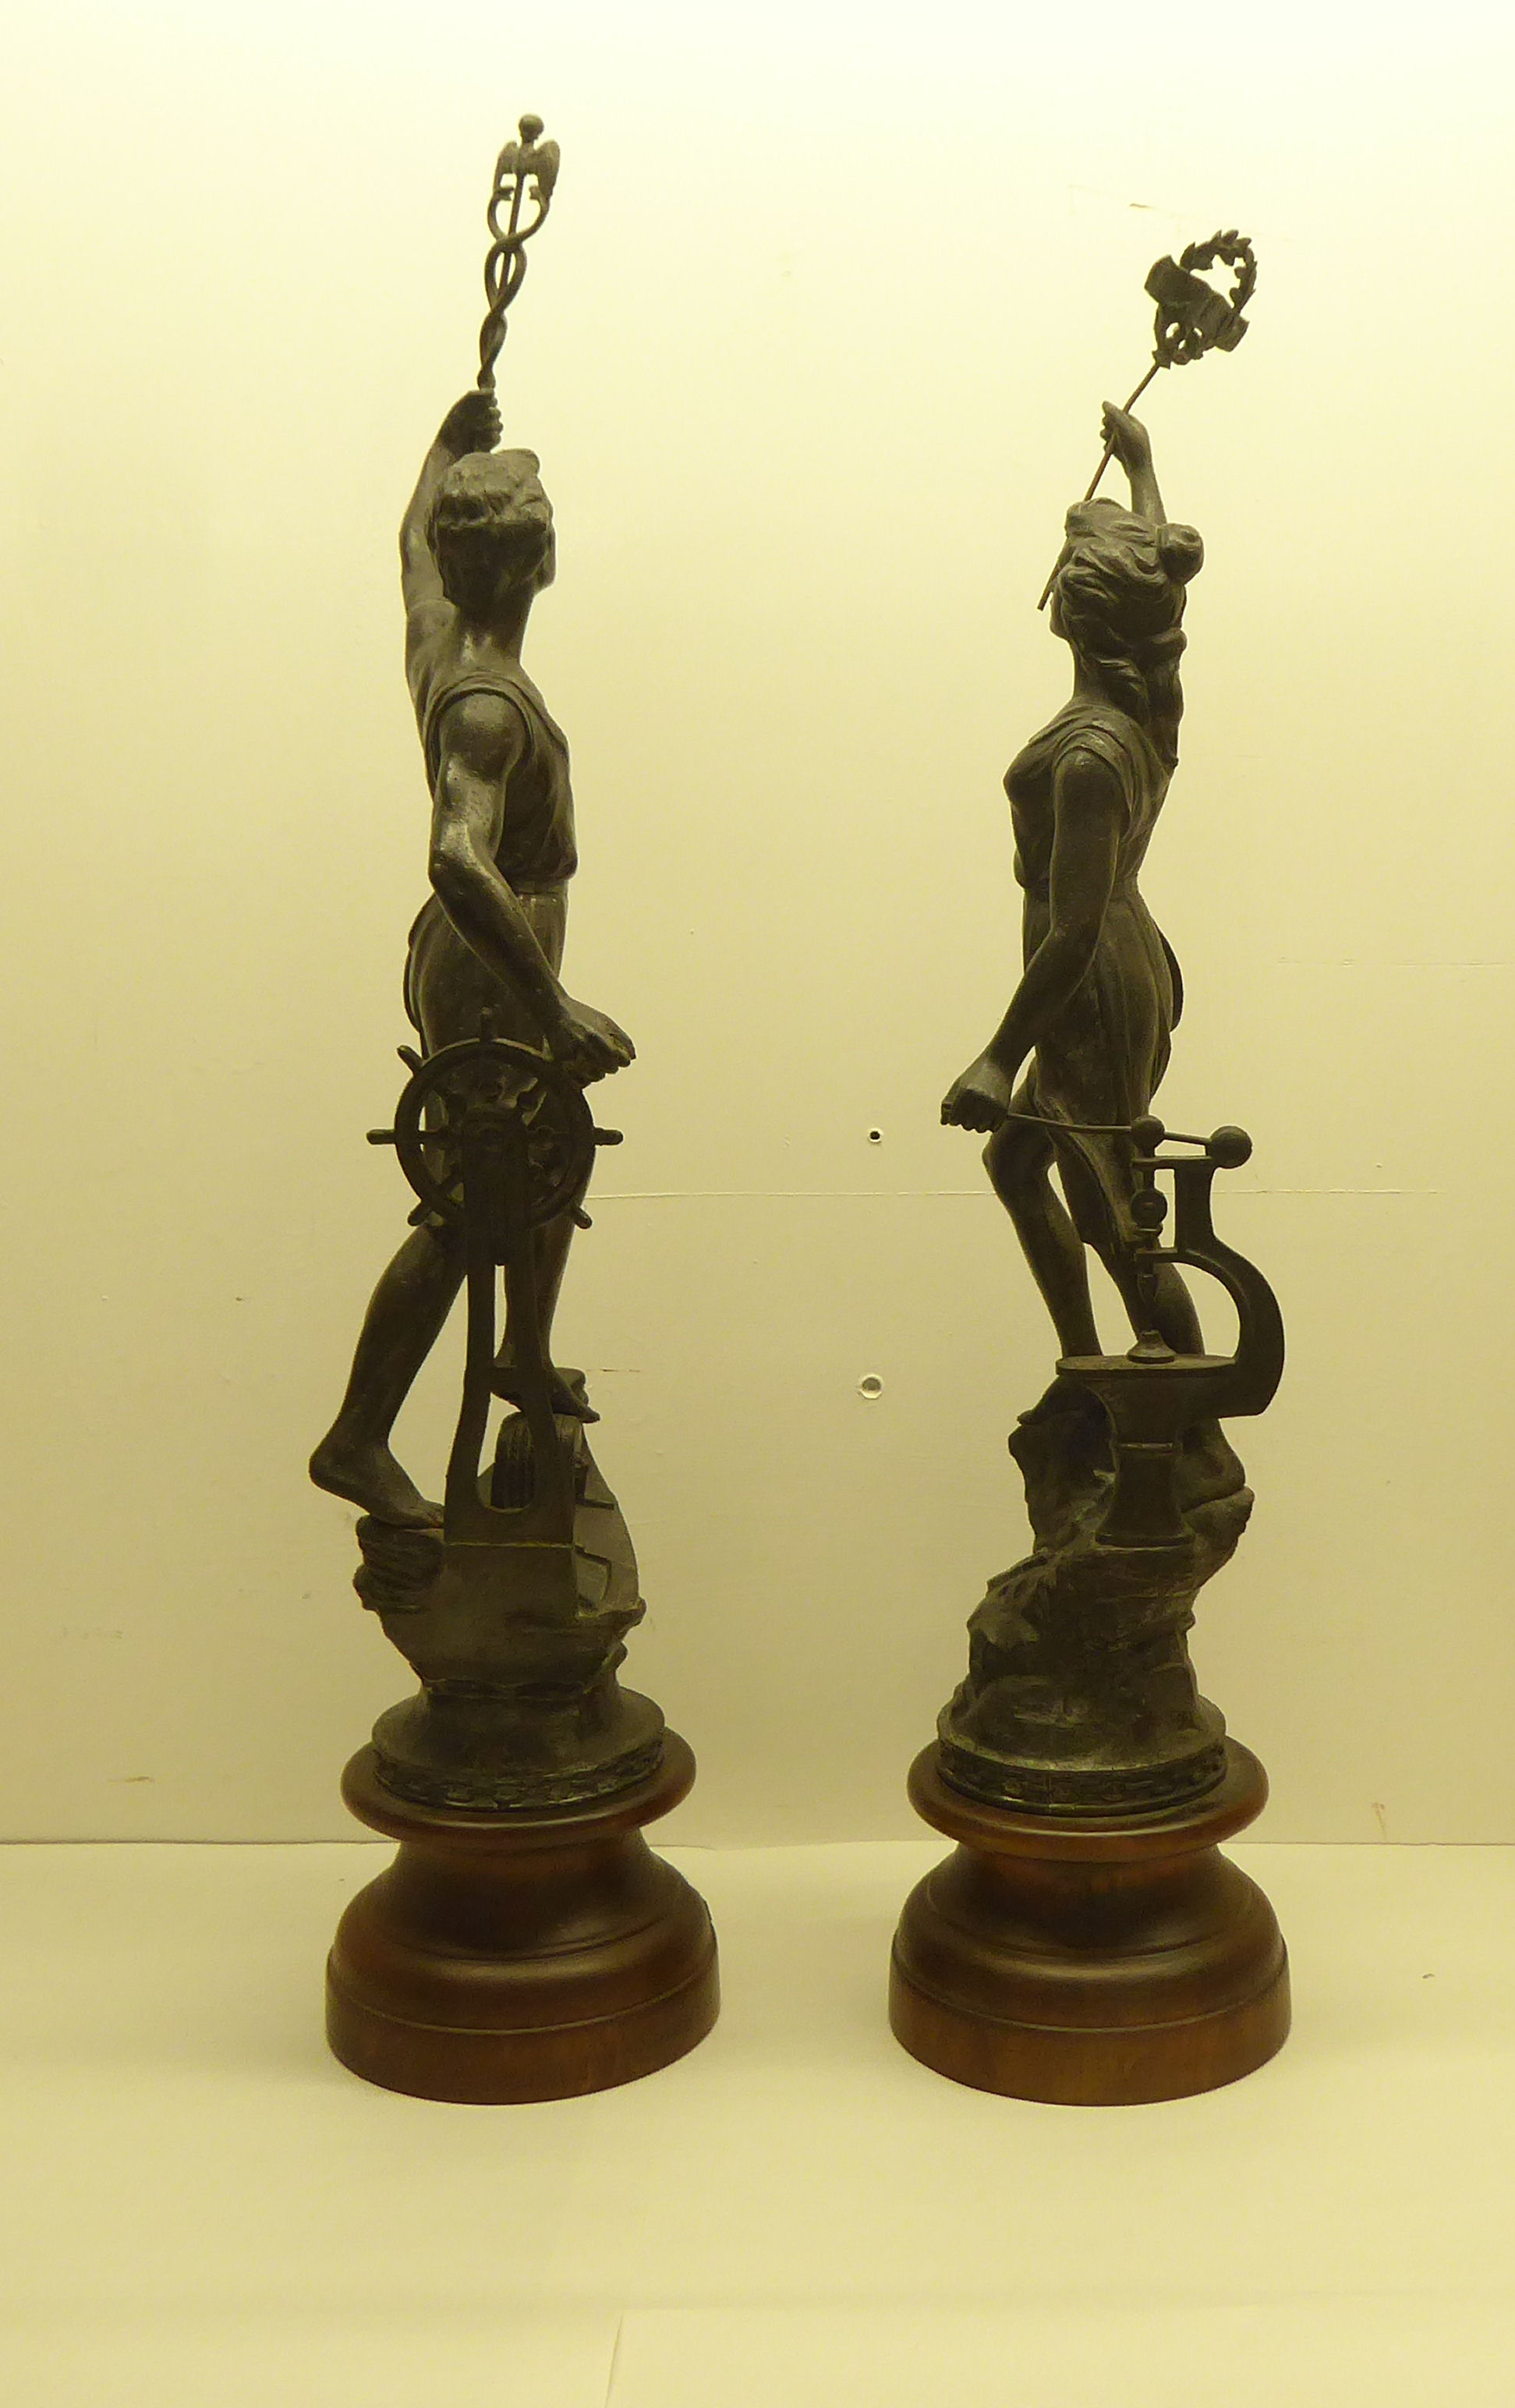 Two 20thC spelter figures, on a plinth  29"h overall - Image 2 of 4